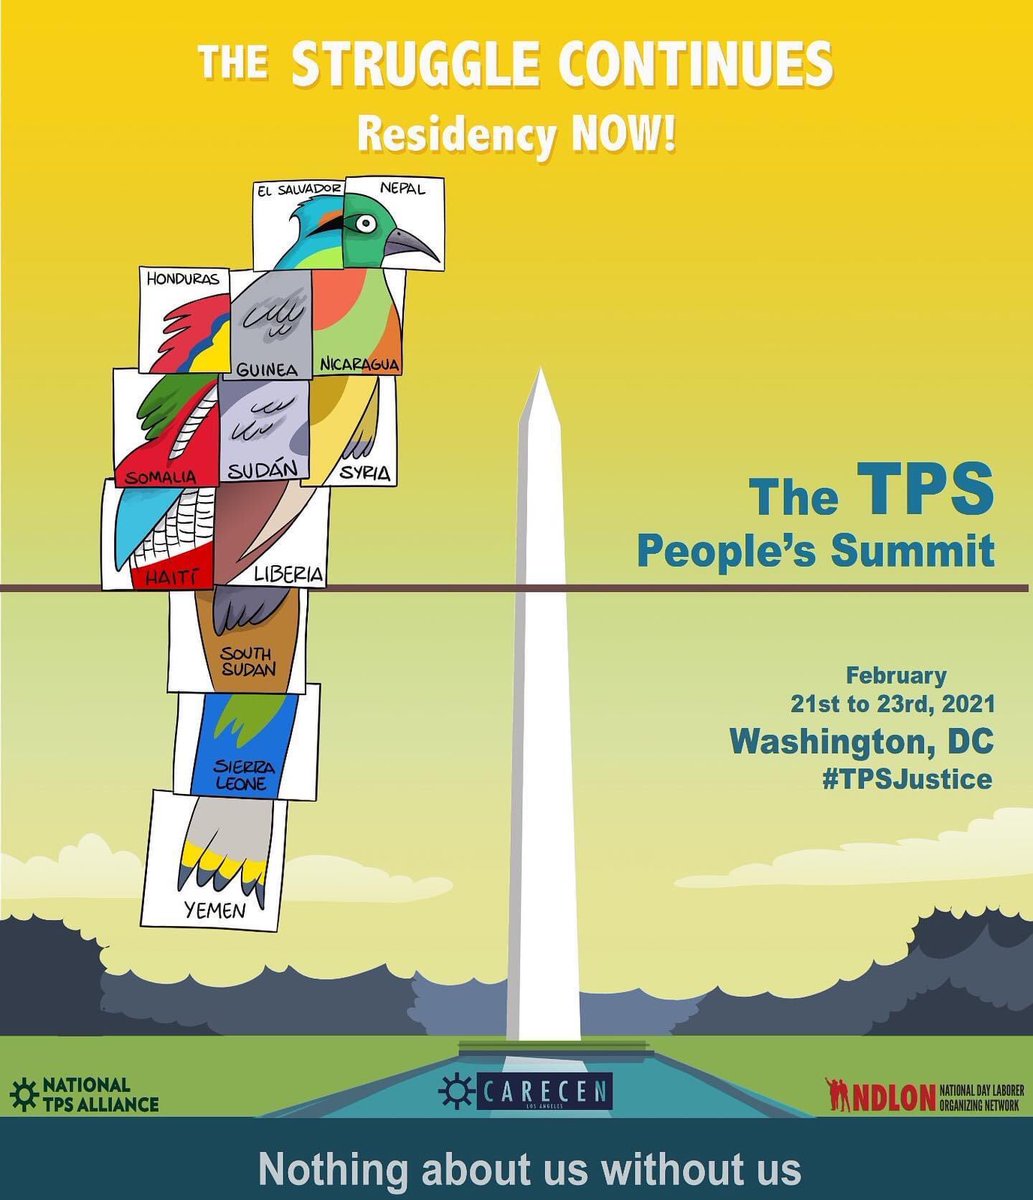 @TPS_Alliance will soon be arriving in Washington DC to ensure that Congress and the Biden administration delivers on its promises to our families. Join us in Washington, as we demand a permanent residency as soon as possible! #ResidencyNow